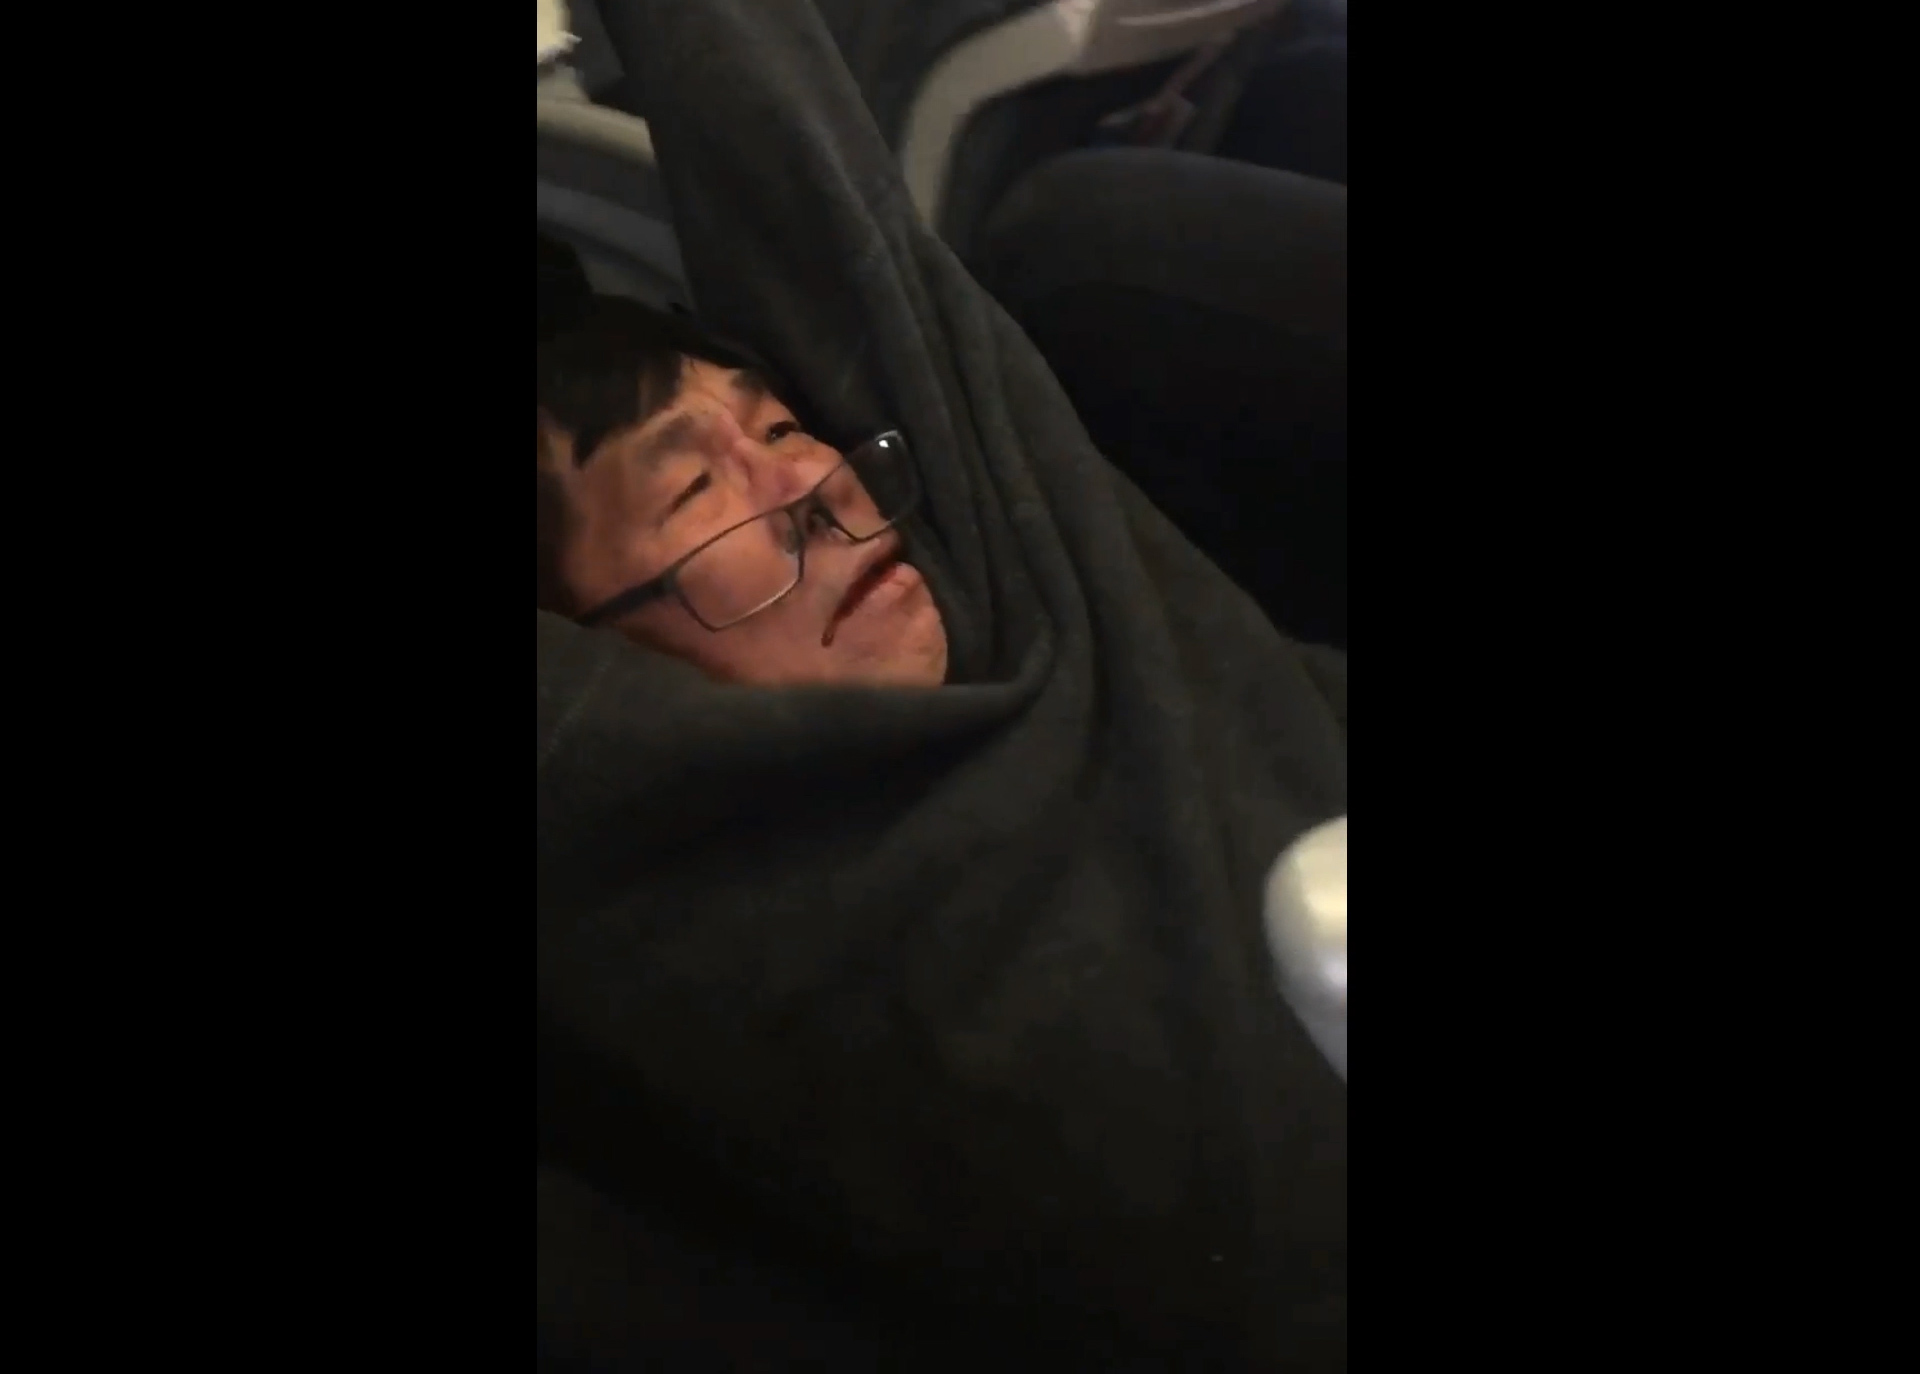 VIDEO: Passenger dragged off overbooked United plane